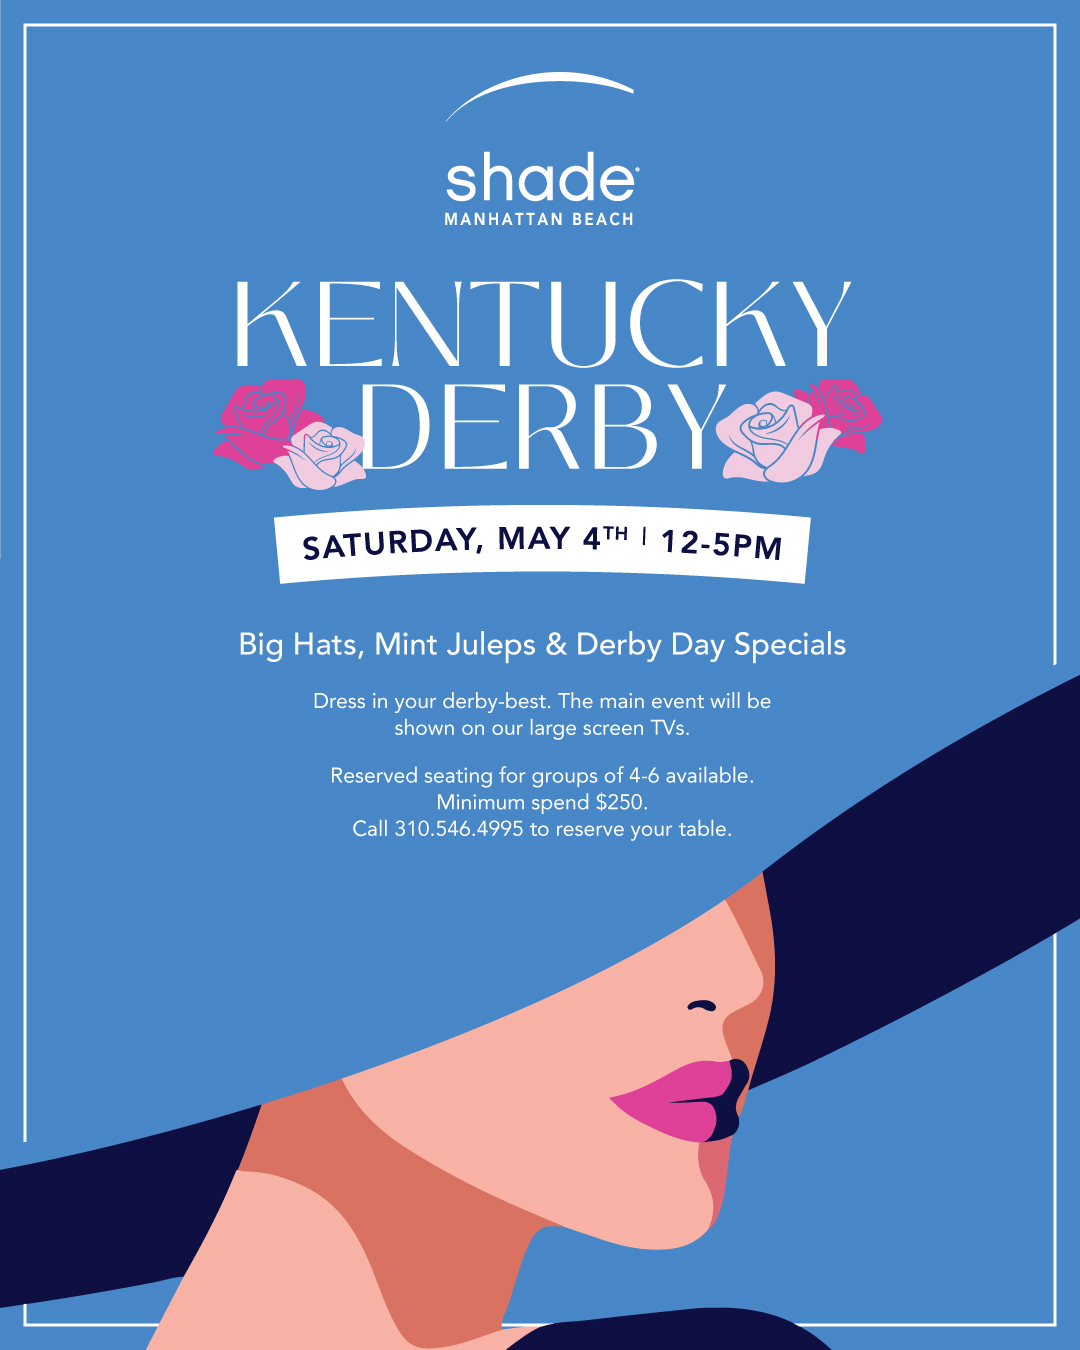 Kentucky Derby Party promotional poster